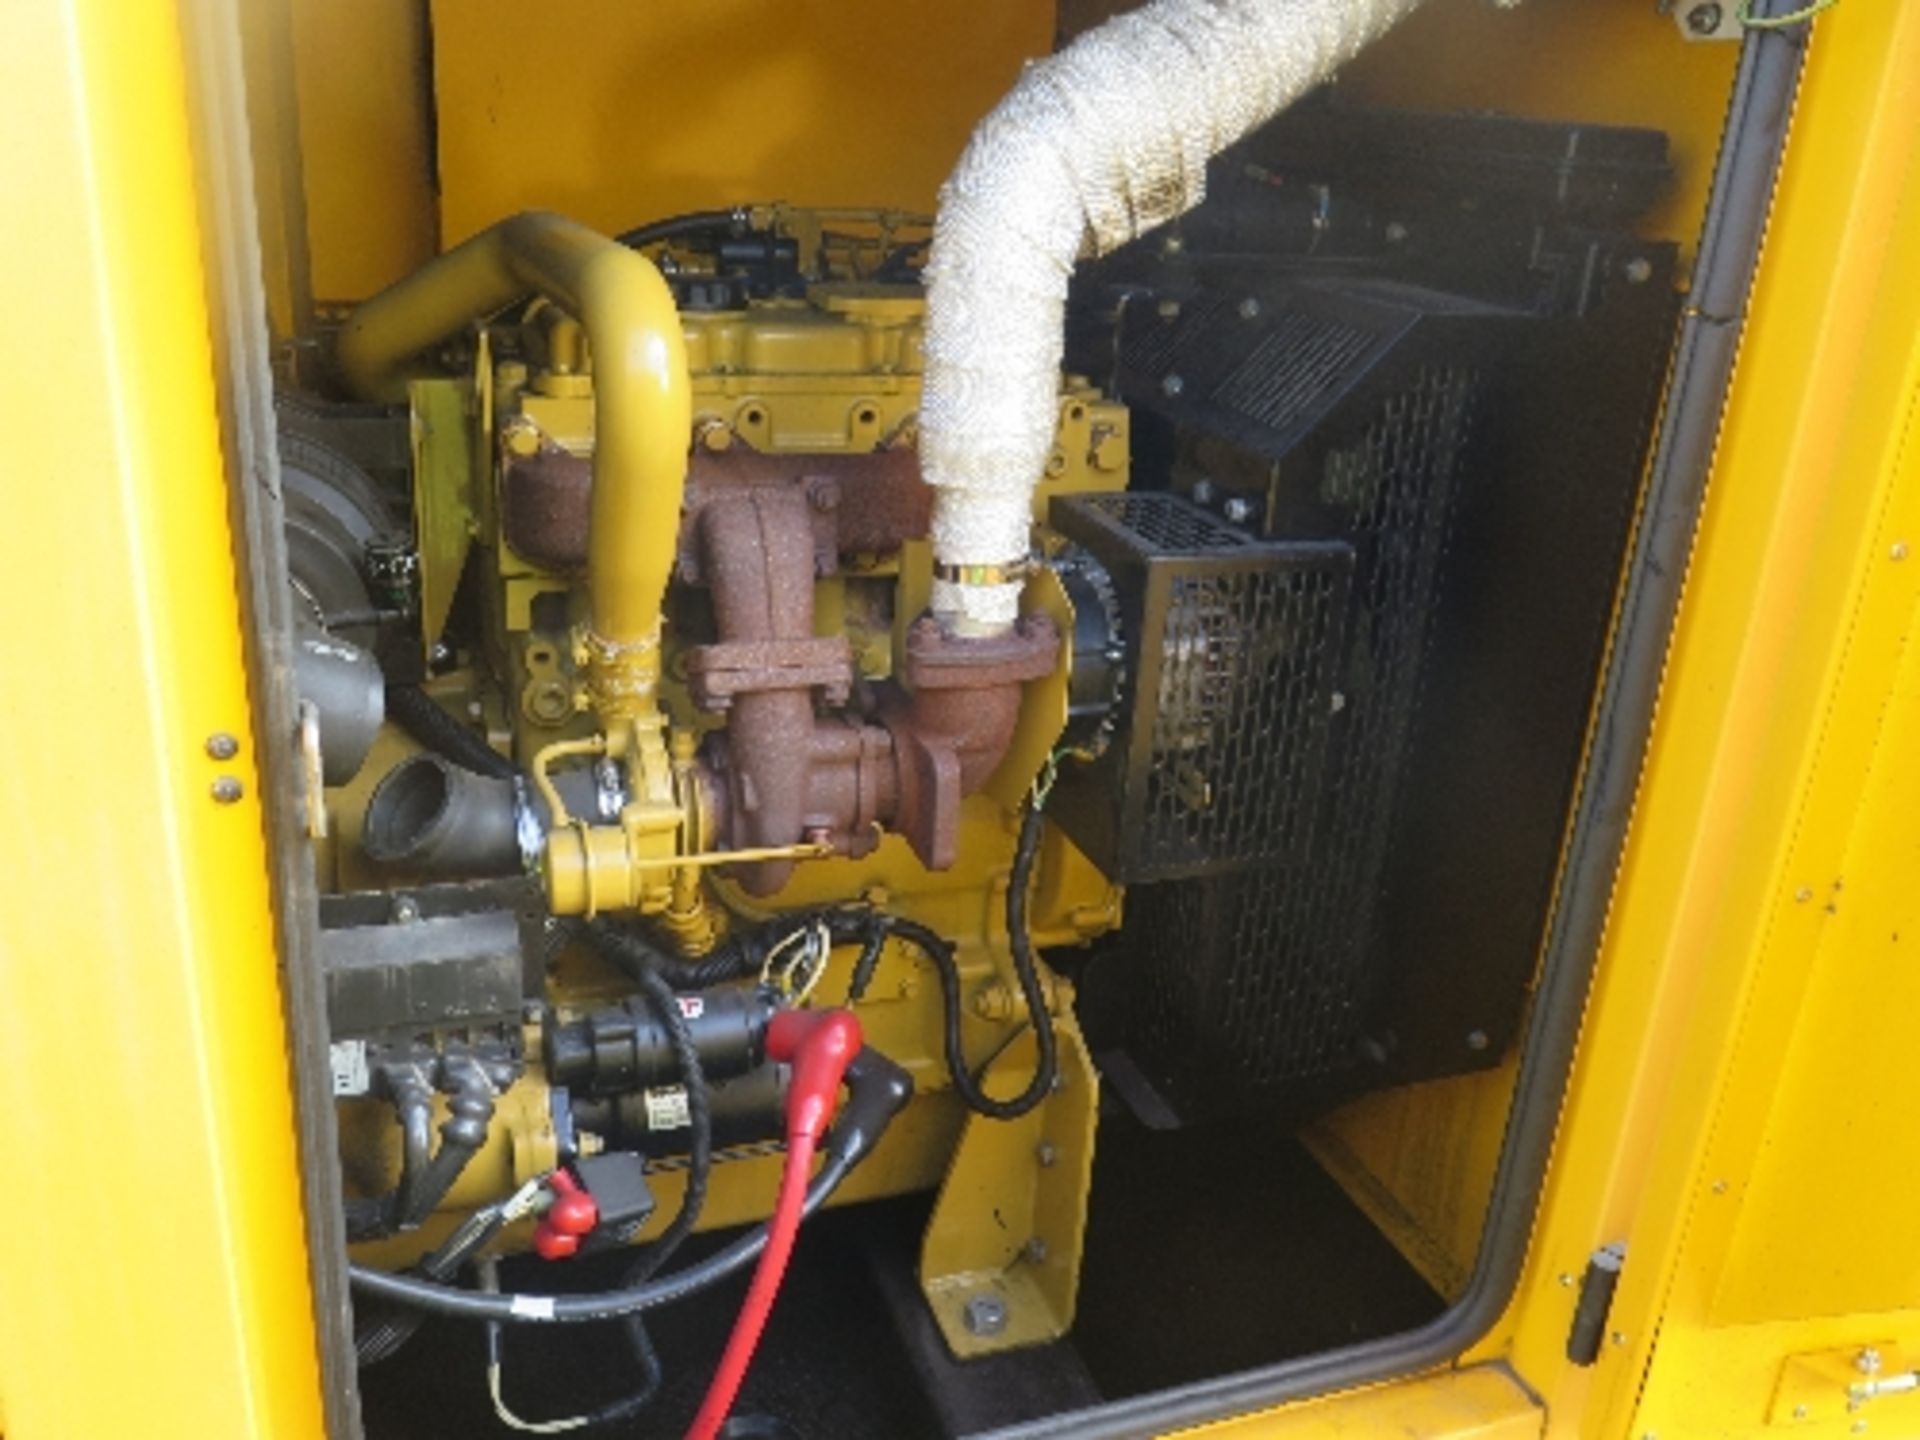 Caterpillar XQE45 generator 21460 hrs 157790
PERKINS - RUNS AND MAKES POWER
ALL LOTS are SOLD AS - Image 5 of 6